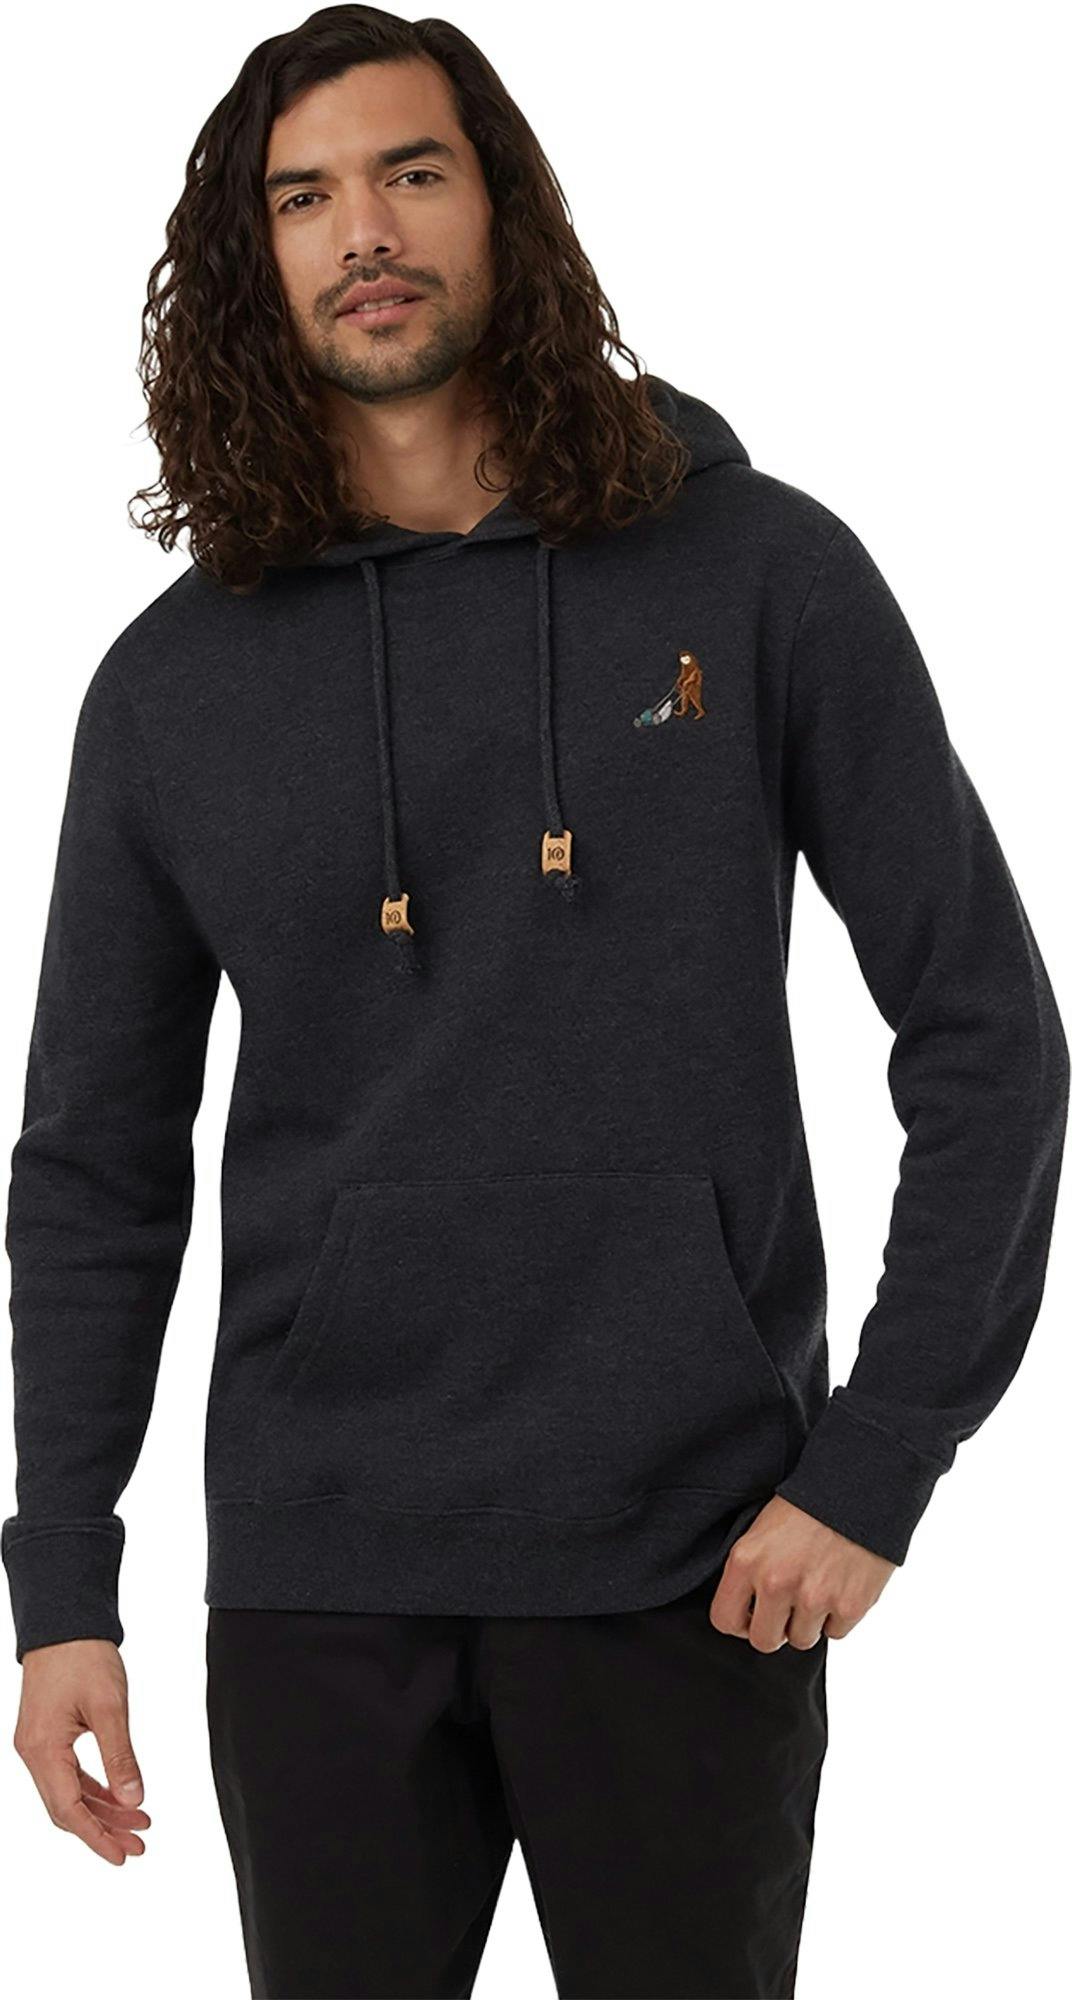 Product image for Sasquatch Graphic Pullover Hoodie - Men's